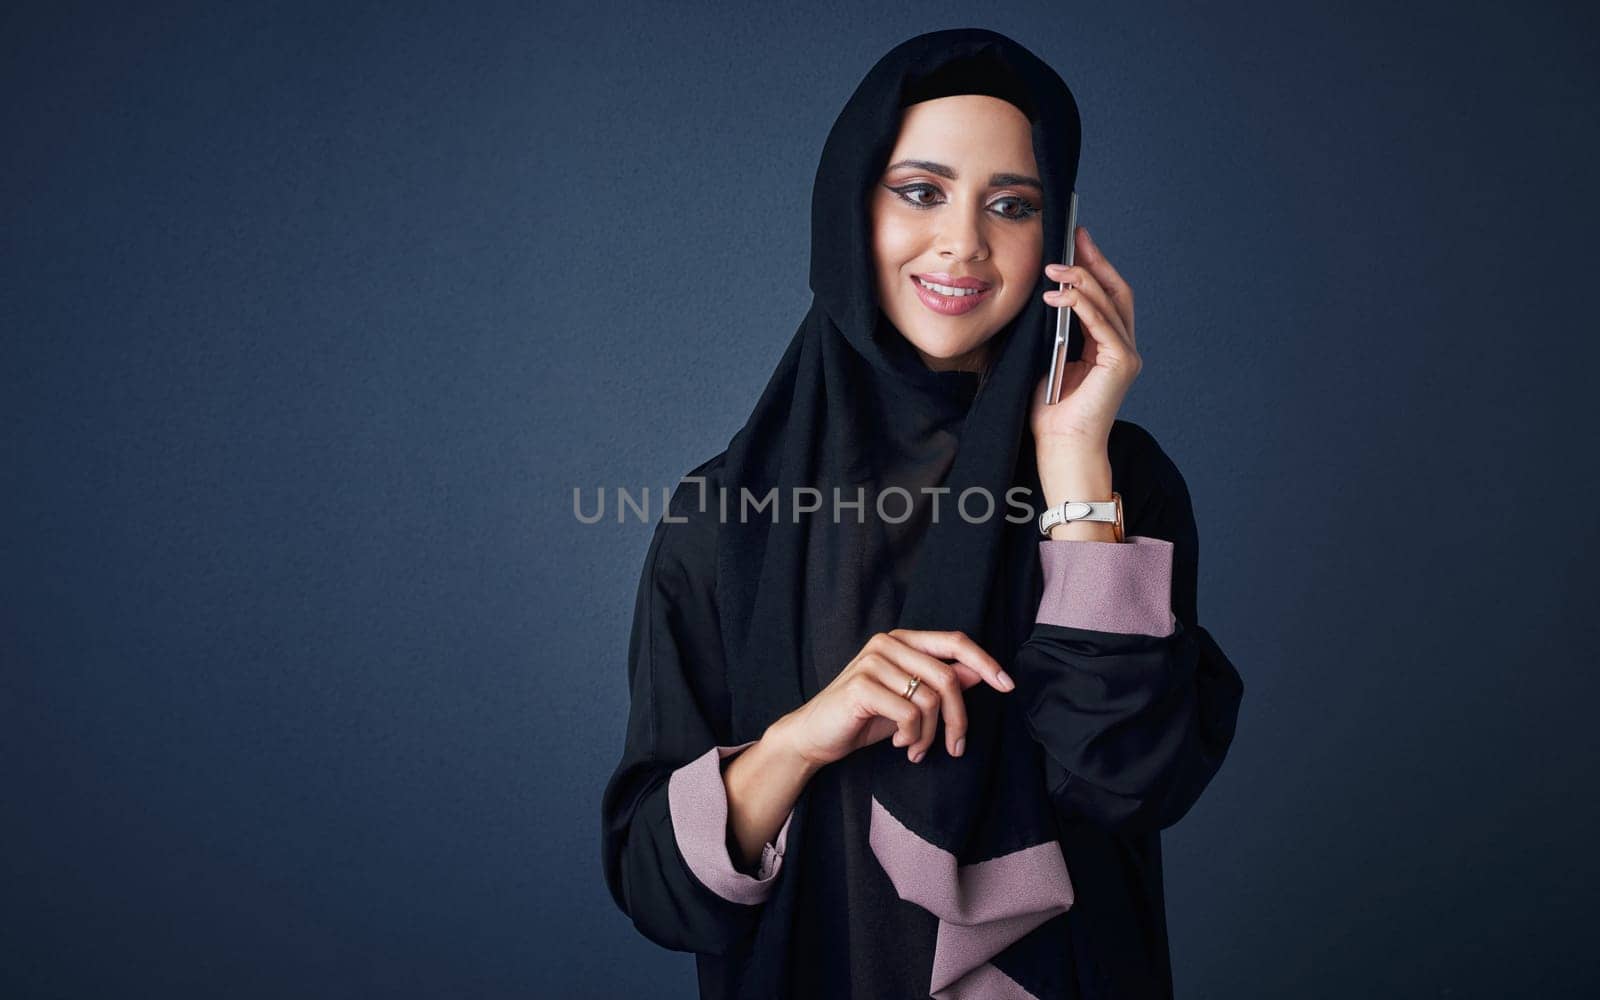 Stay in contact, stay happy. Studio shot of a young woman wearing a burqa and using a mobile phone against a gray background